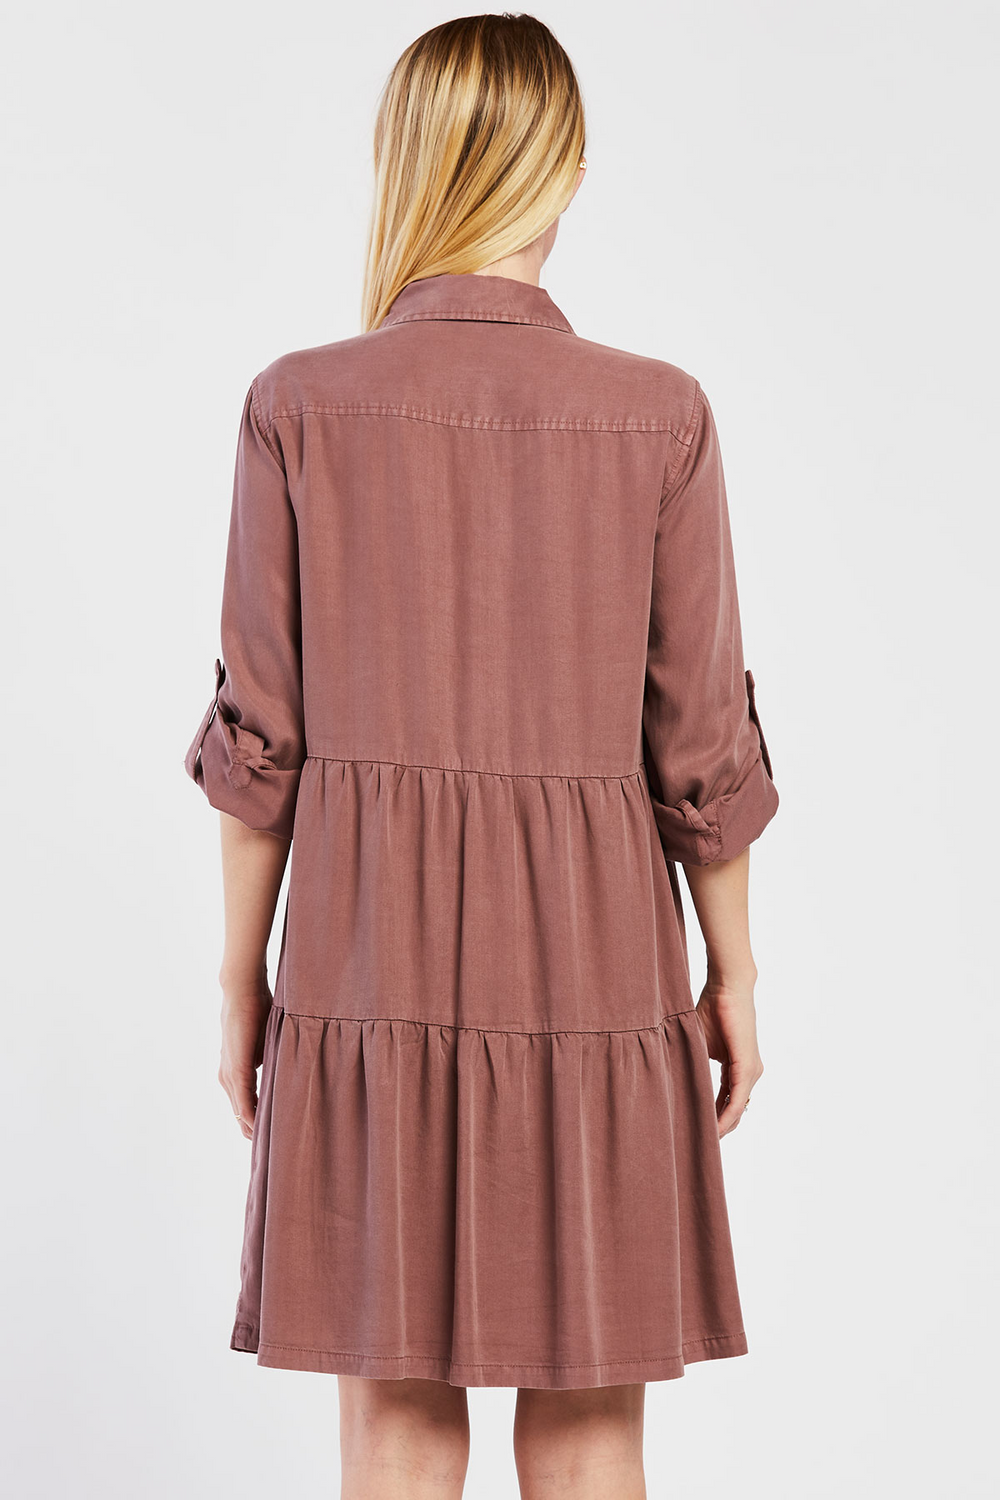 BREE DRESS - DRIED ROSE - Kingfisher Road - Online Boutique